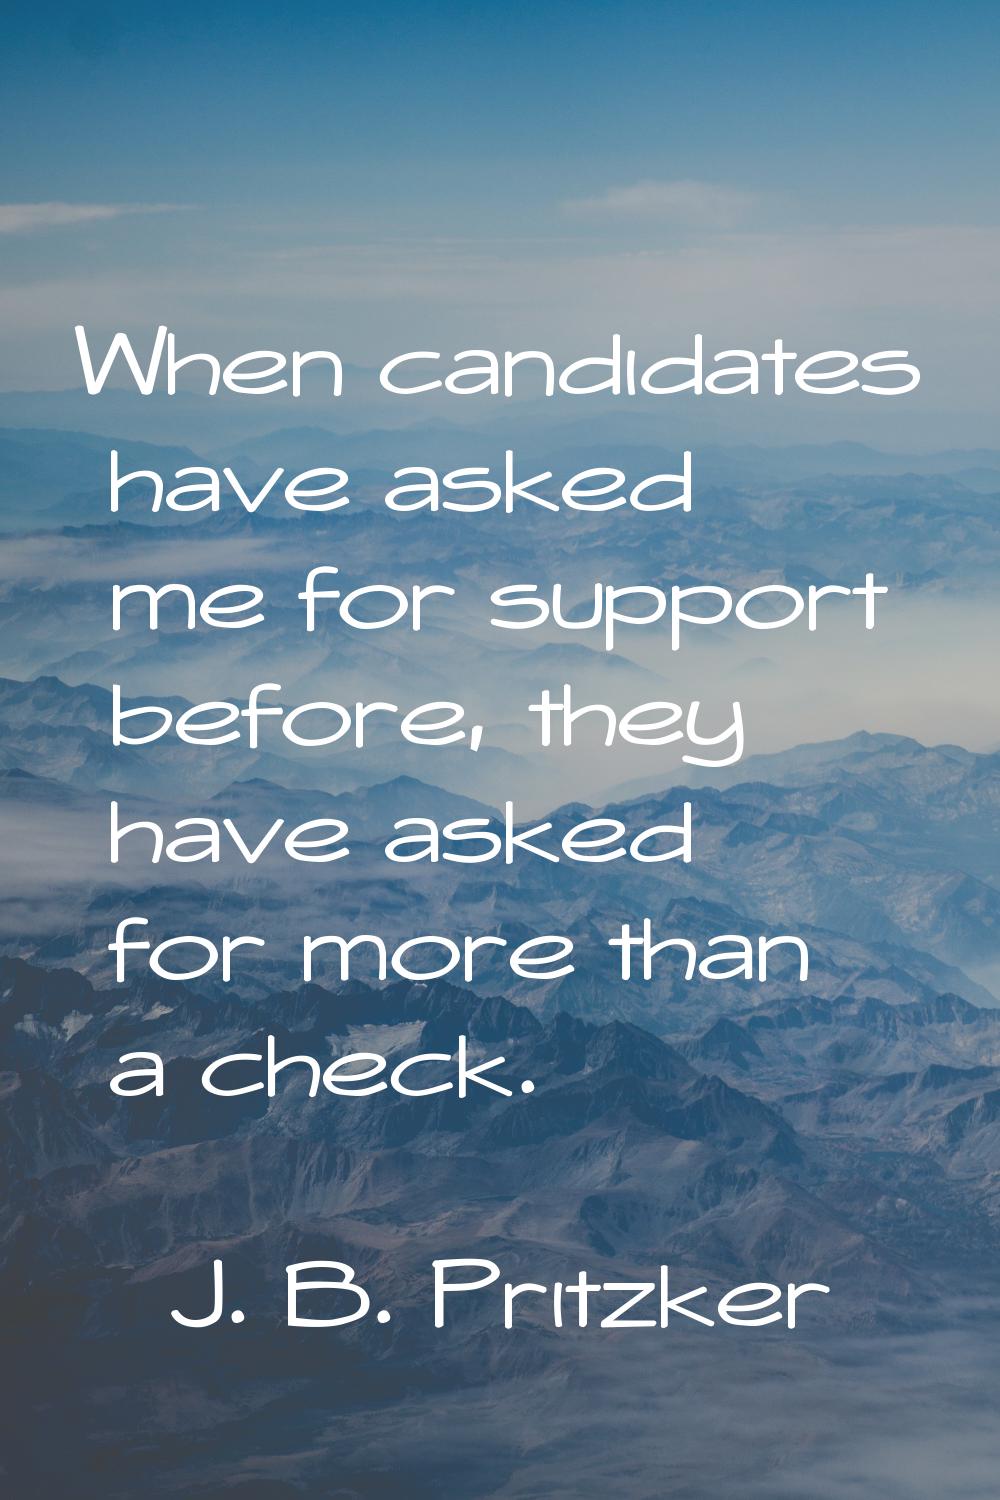 When candidates have asked me for support before, they have asked for more than a check.